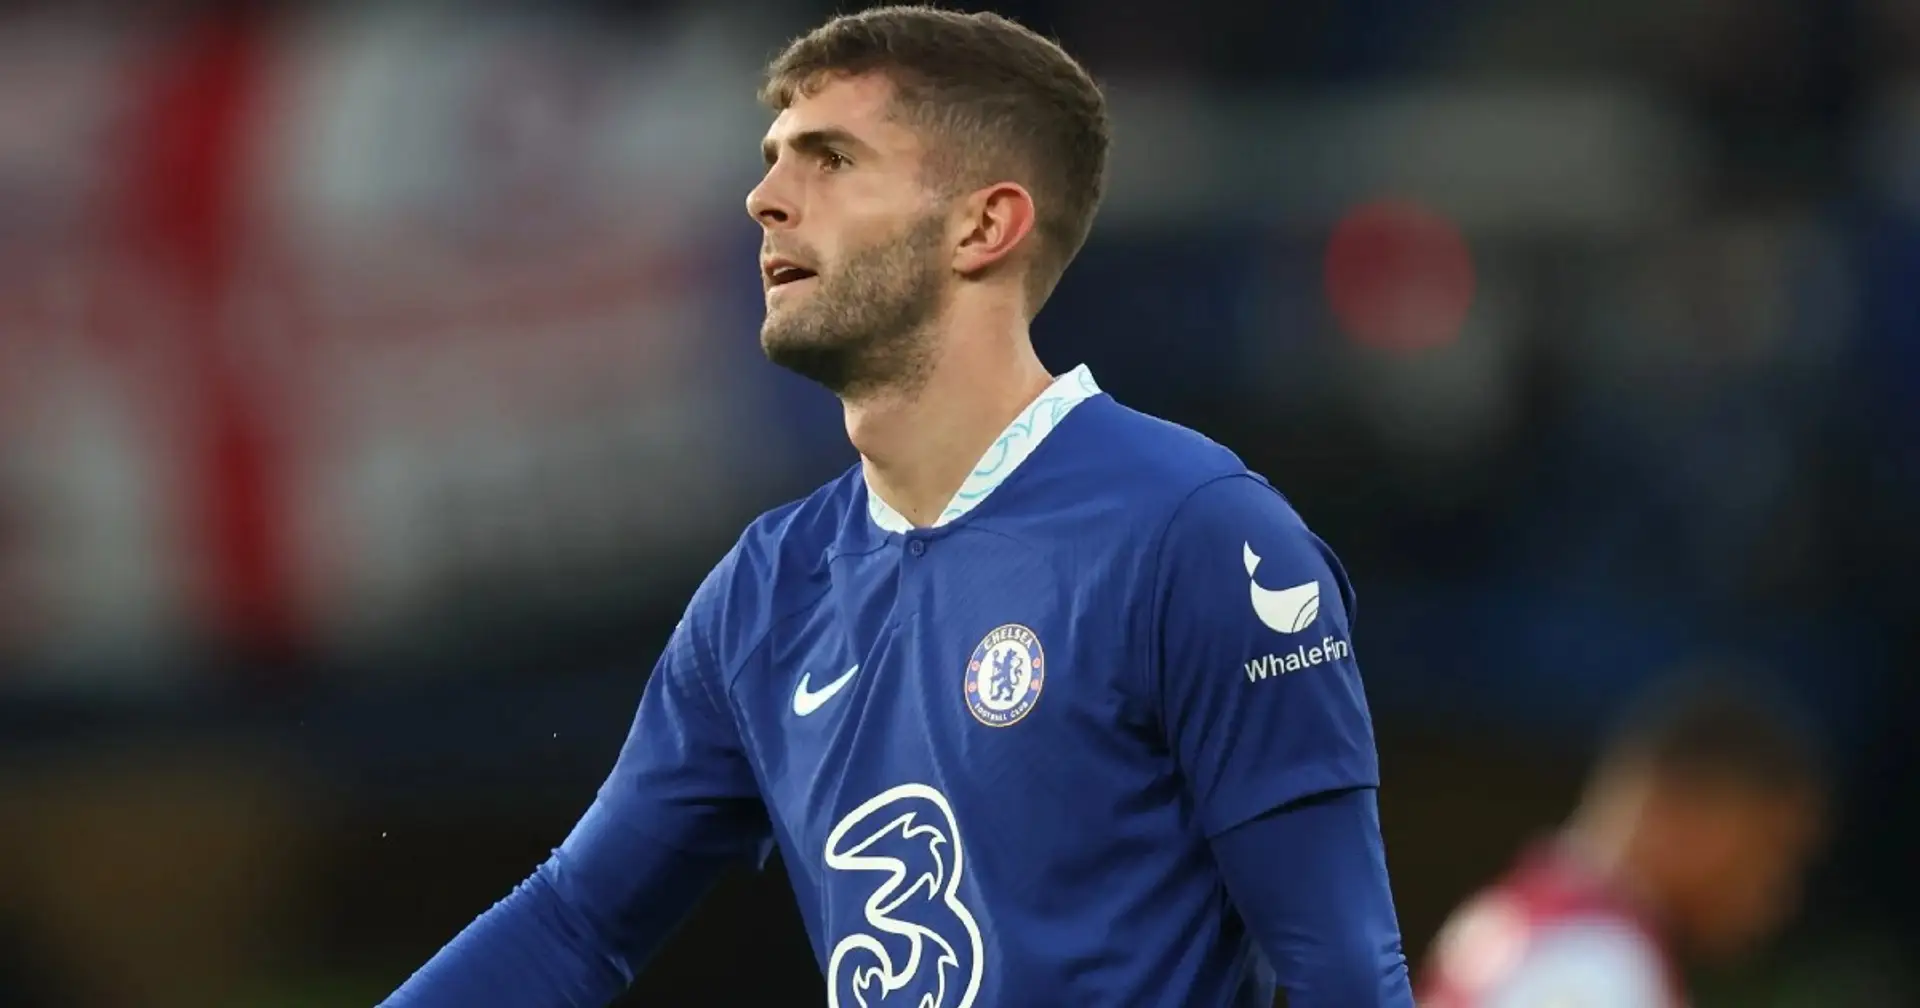 AC Milan negotiating with Chelsea over potential Pulisic deal: Romano